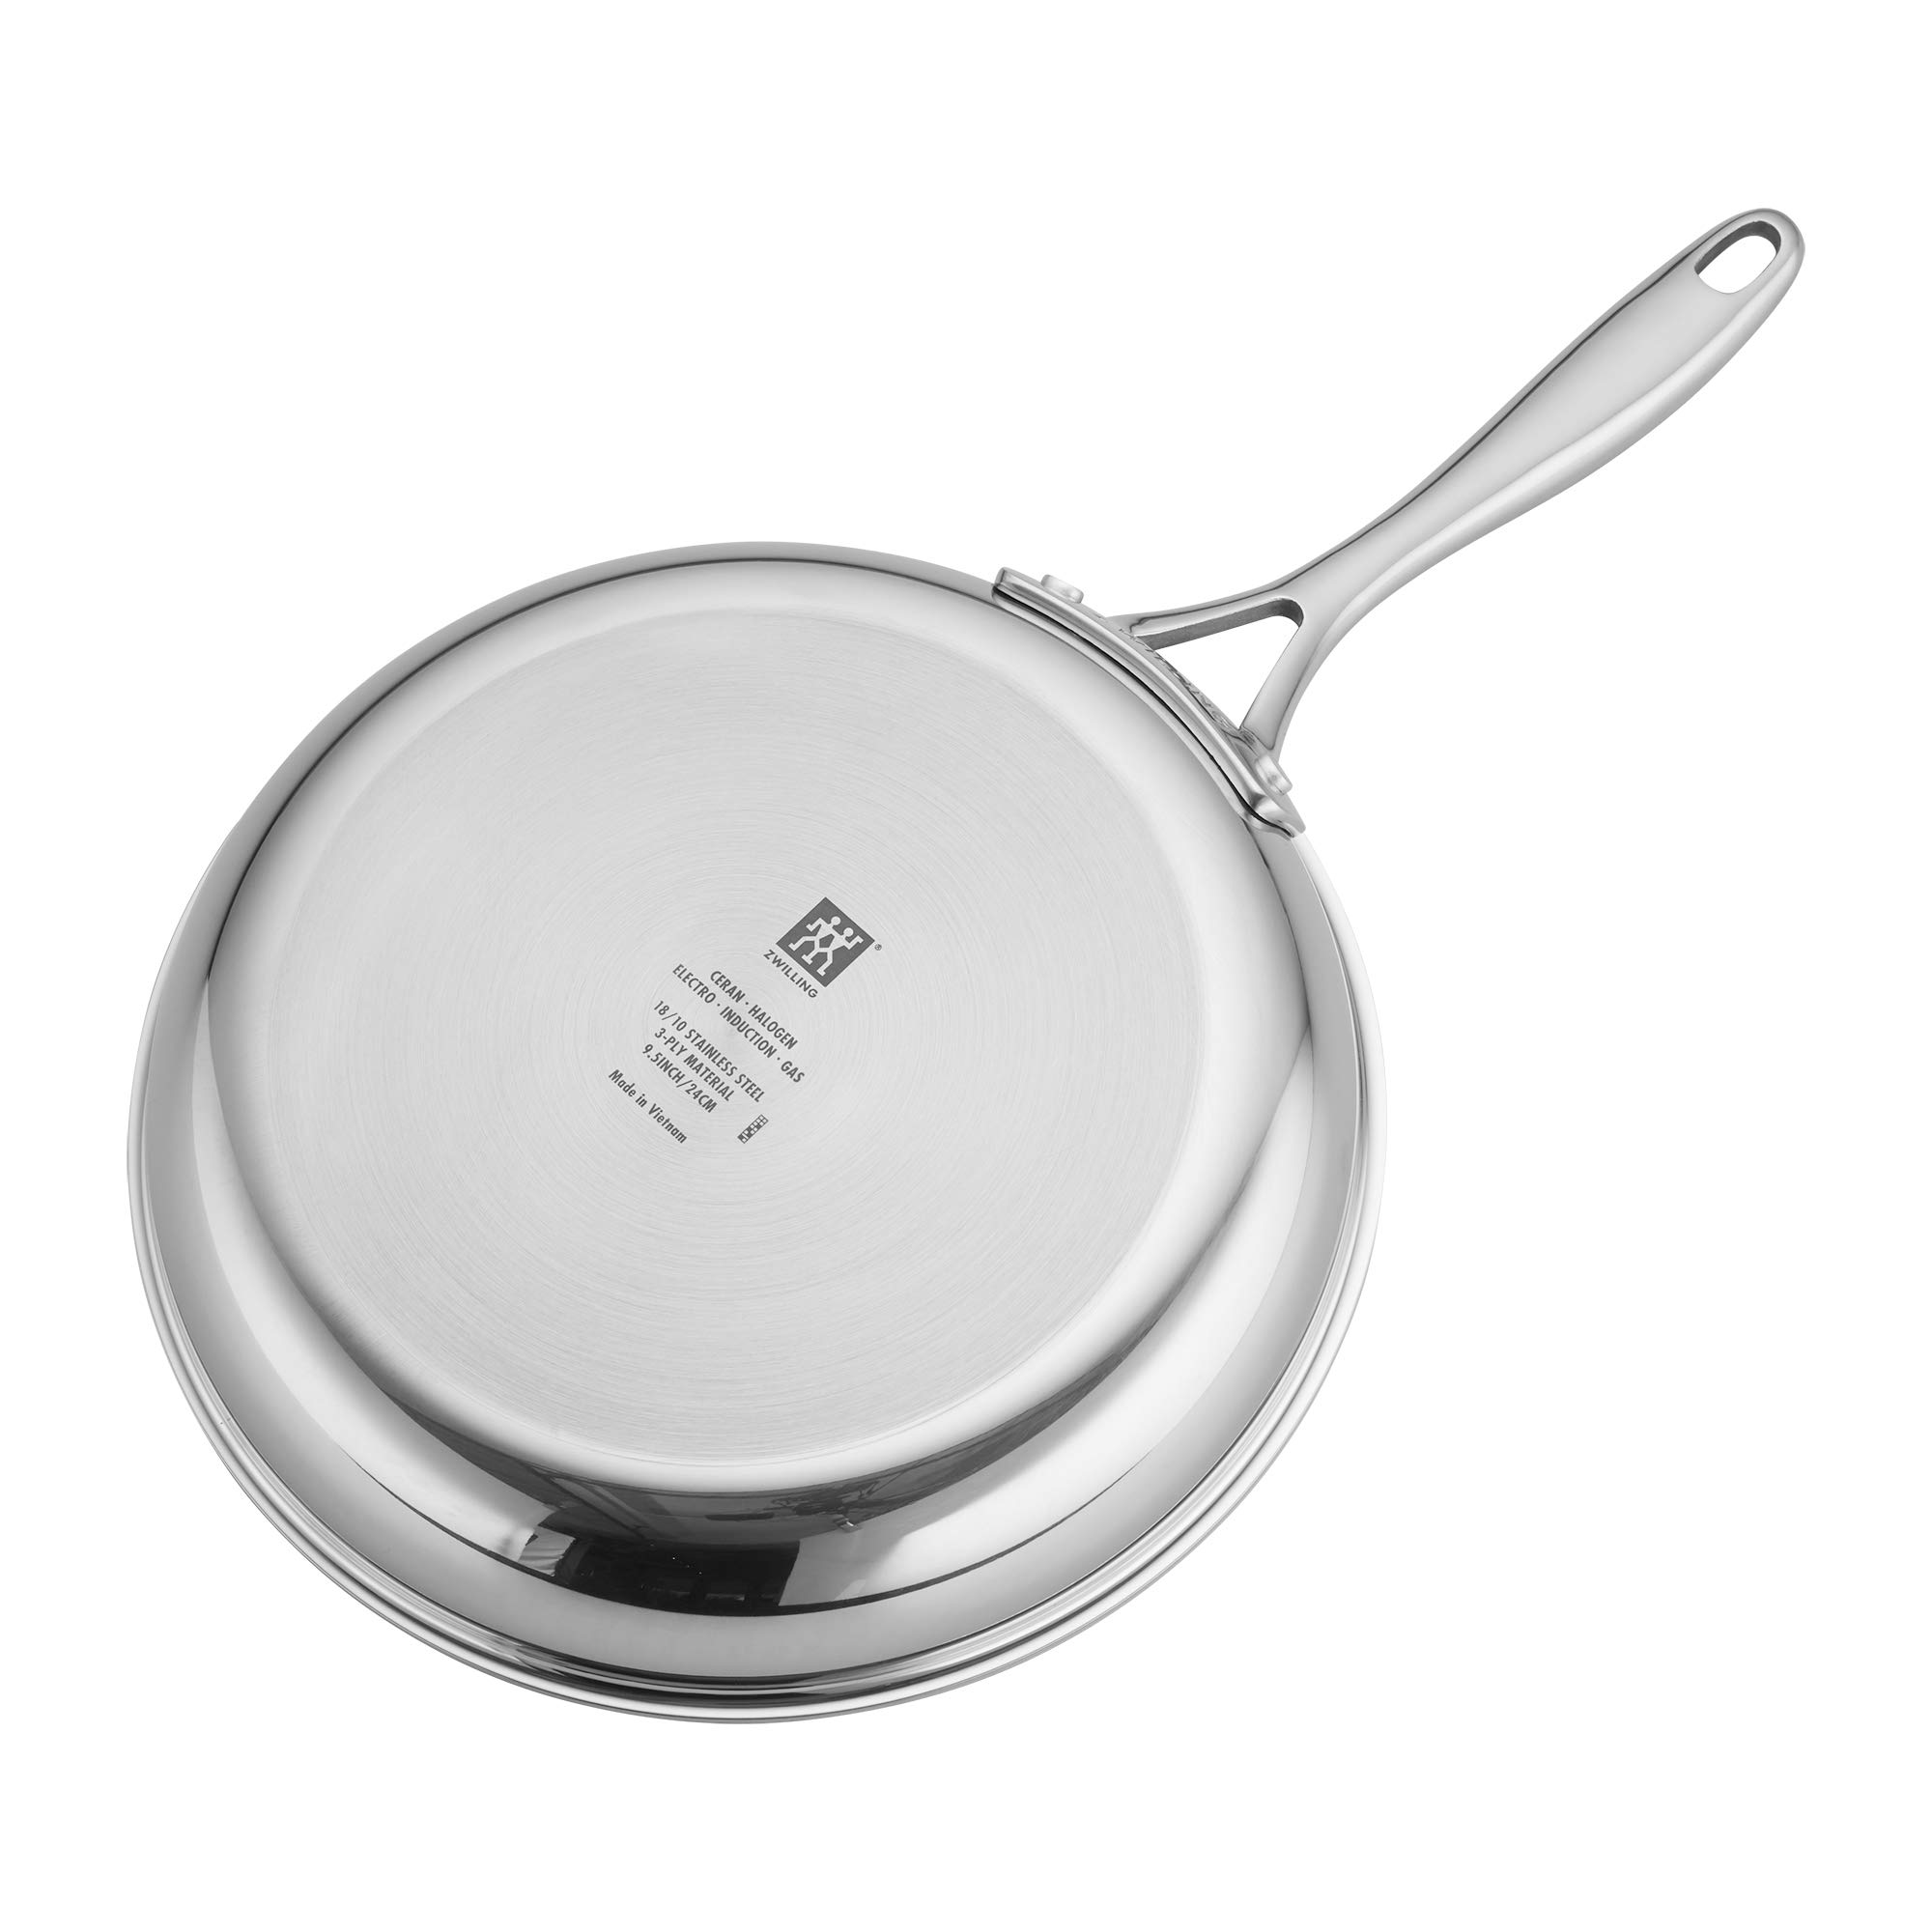 ZWILLING Clad CFX 9.5-inch Stainless Steel Ceramic Nonstick Fry Pan with Lid